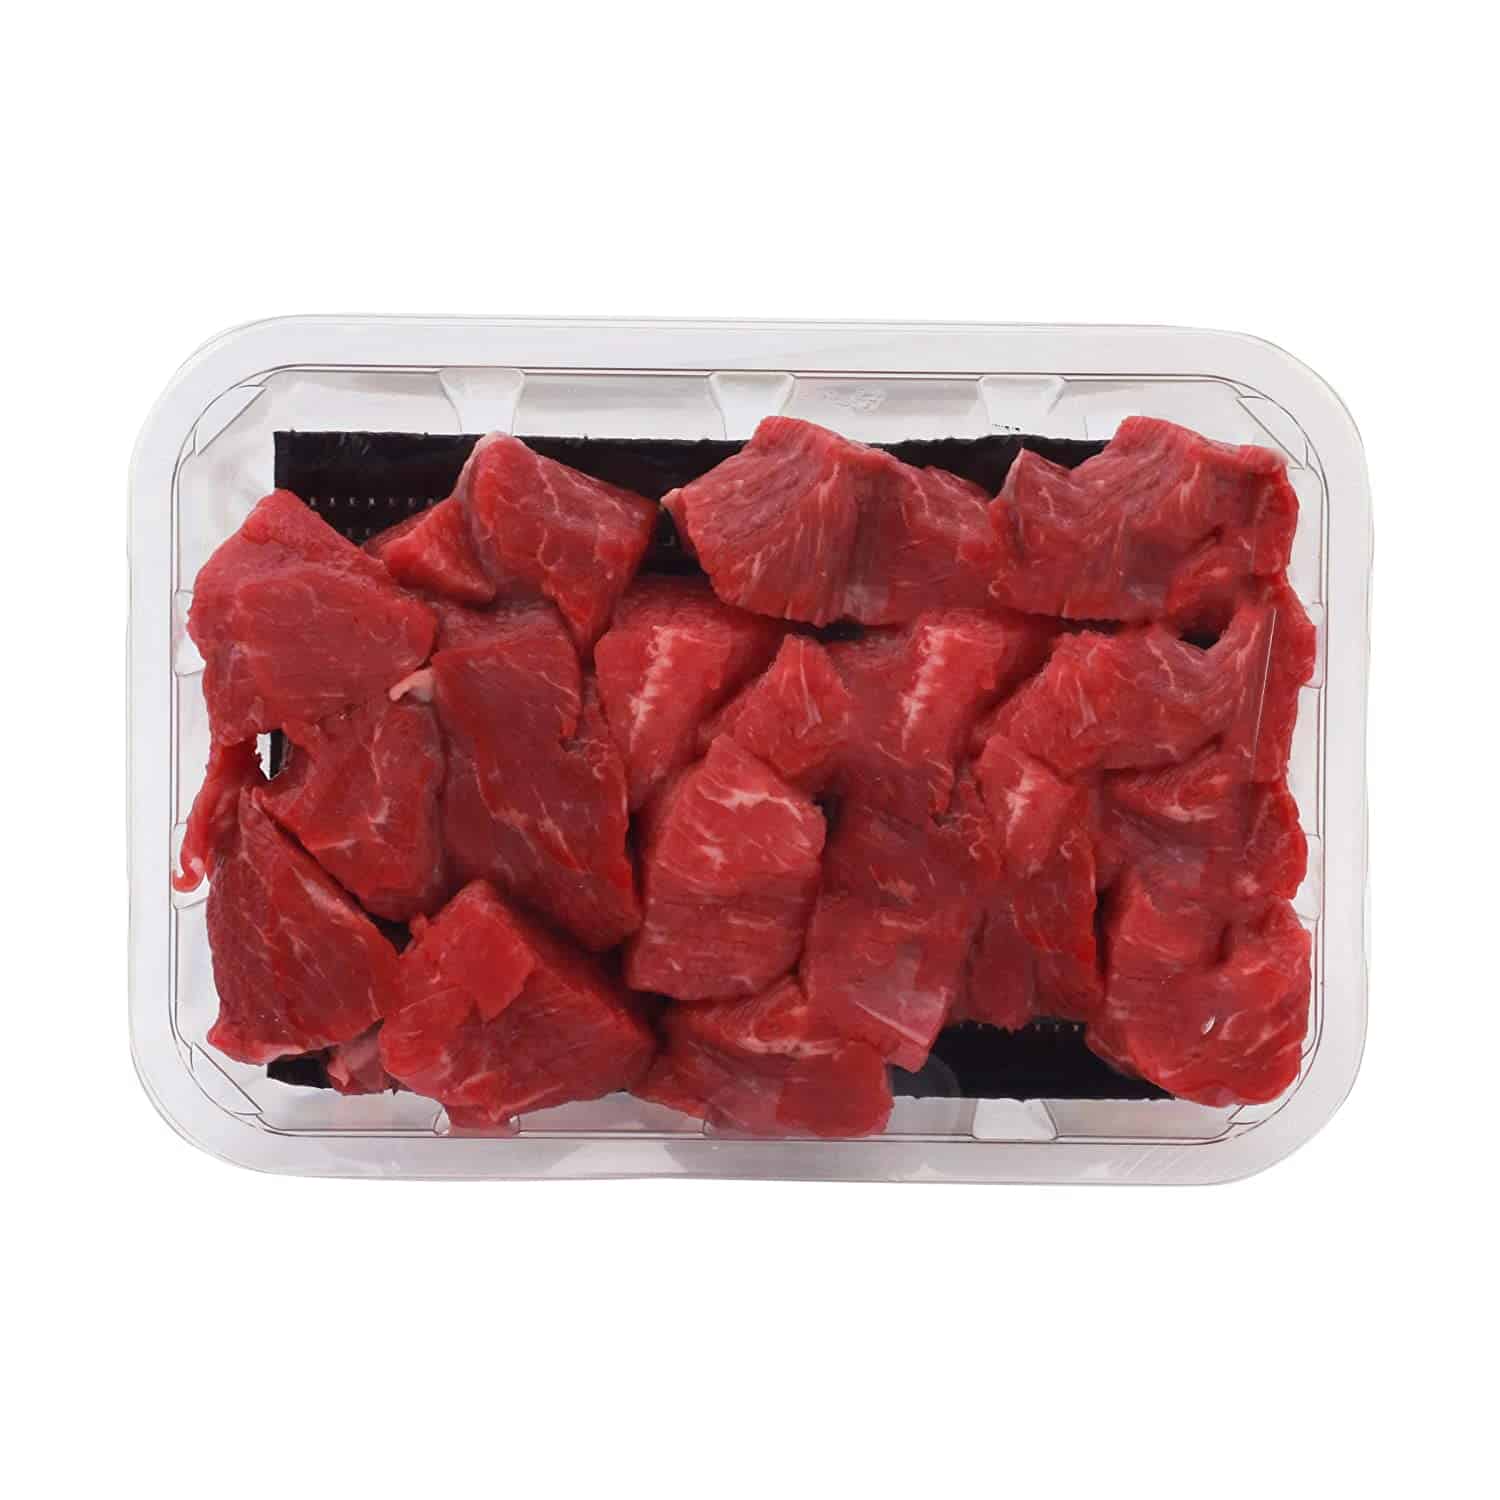 Oasis Fresh Beef Chuck Stew Meat Pasture Raised Step 4 Per 2Lb.